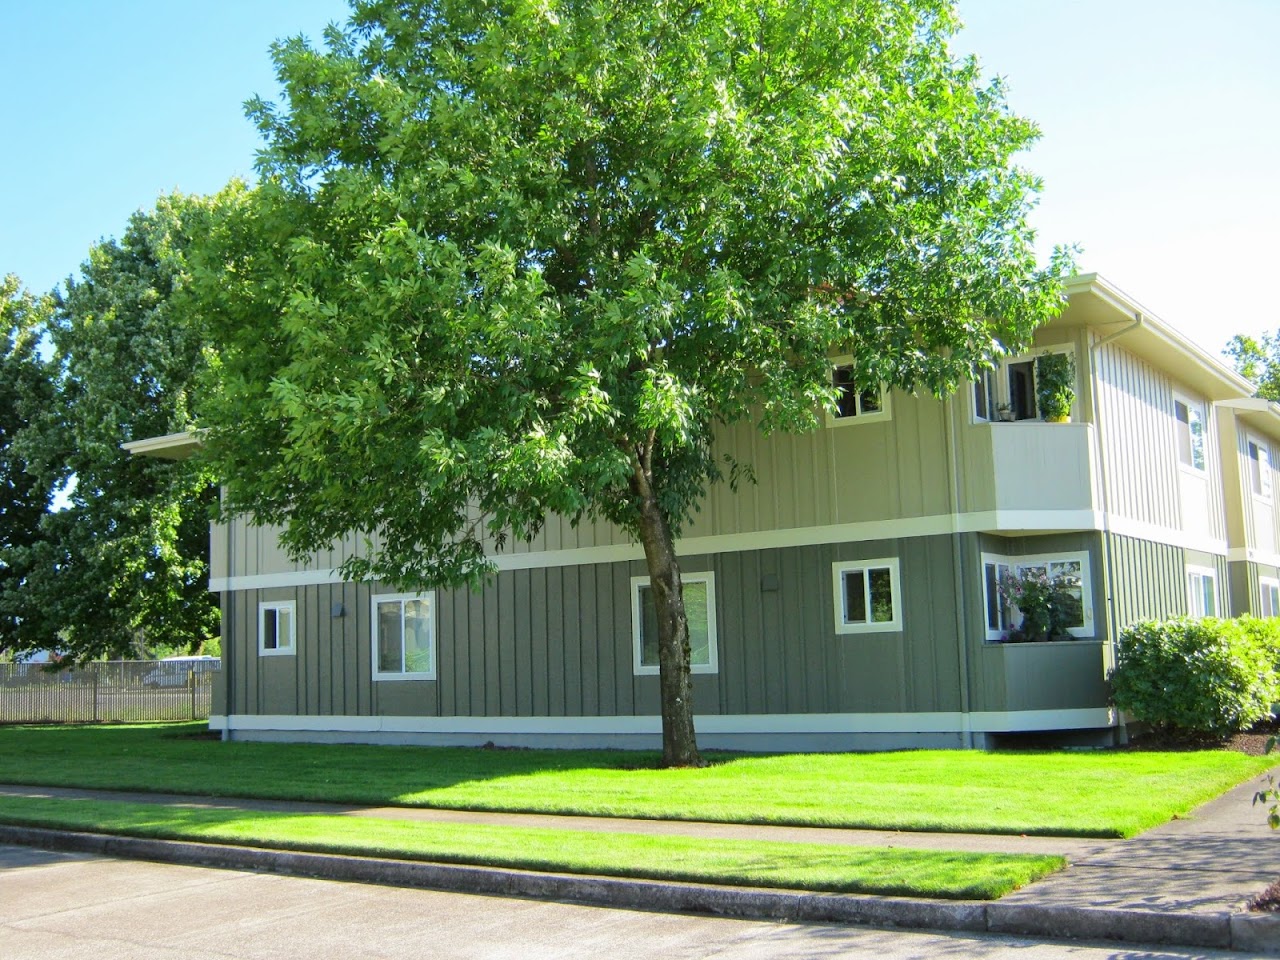 Photo of VILLAGE MANOR. Affordable housing located at 2411 S SECOND ST LEBANON, OR 97355